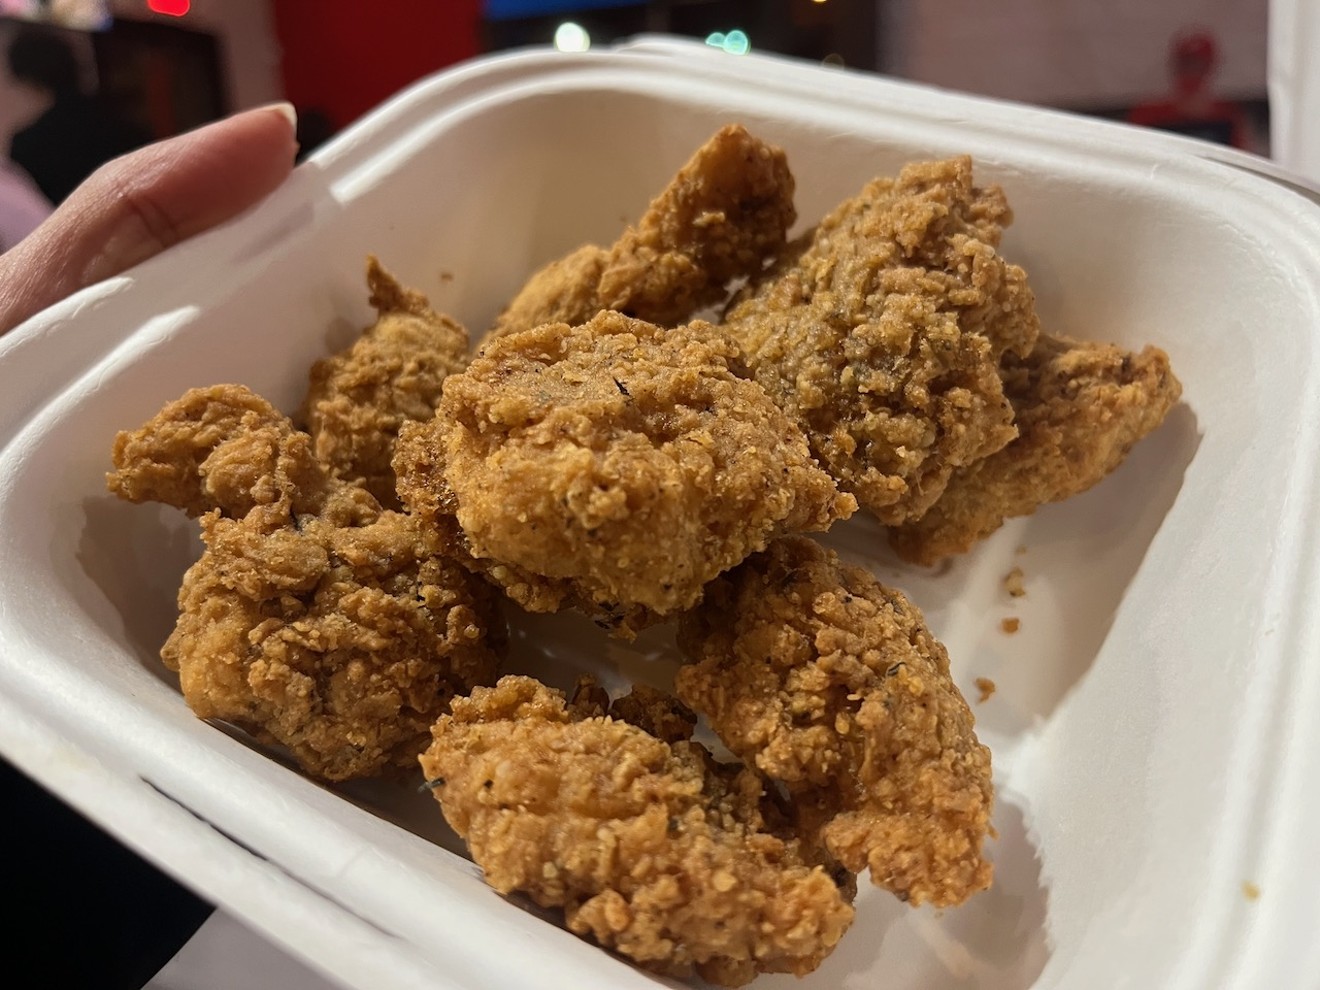 Chikn Nuggets come eight to an order and have a chicken-like texture.